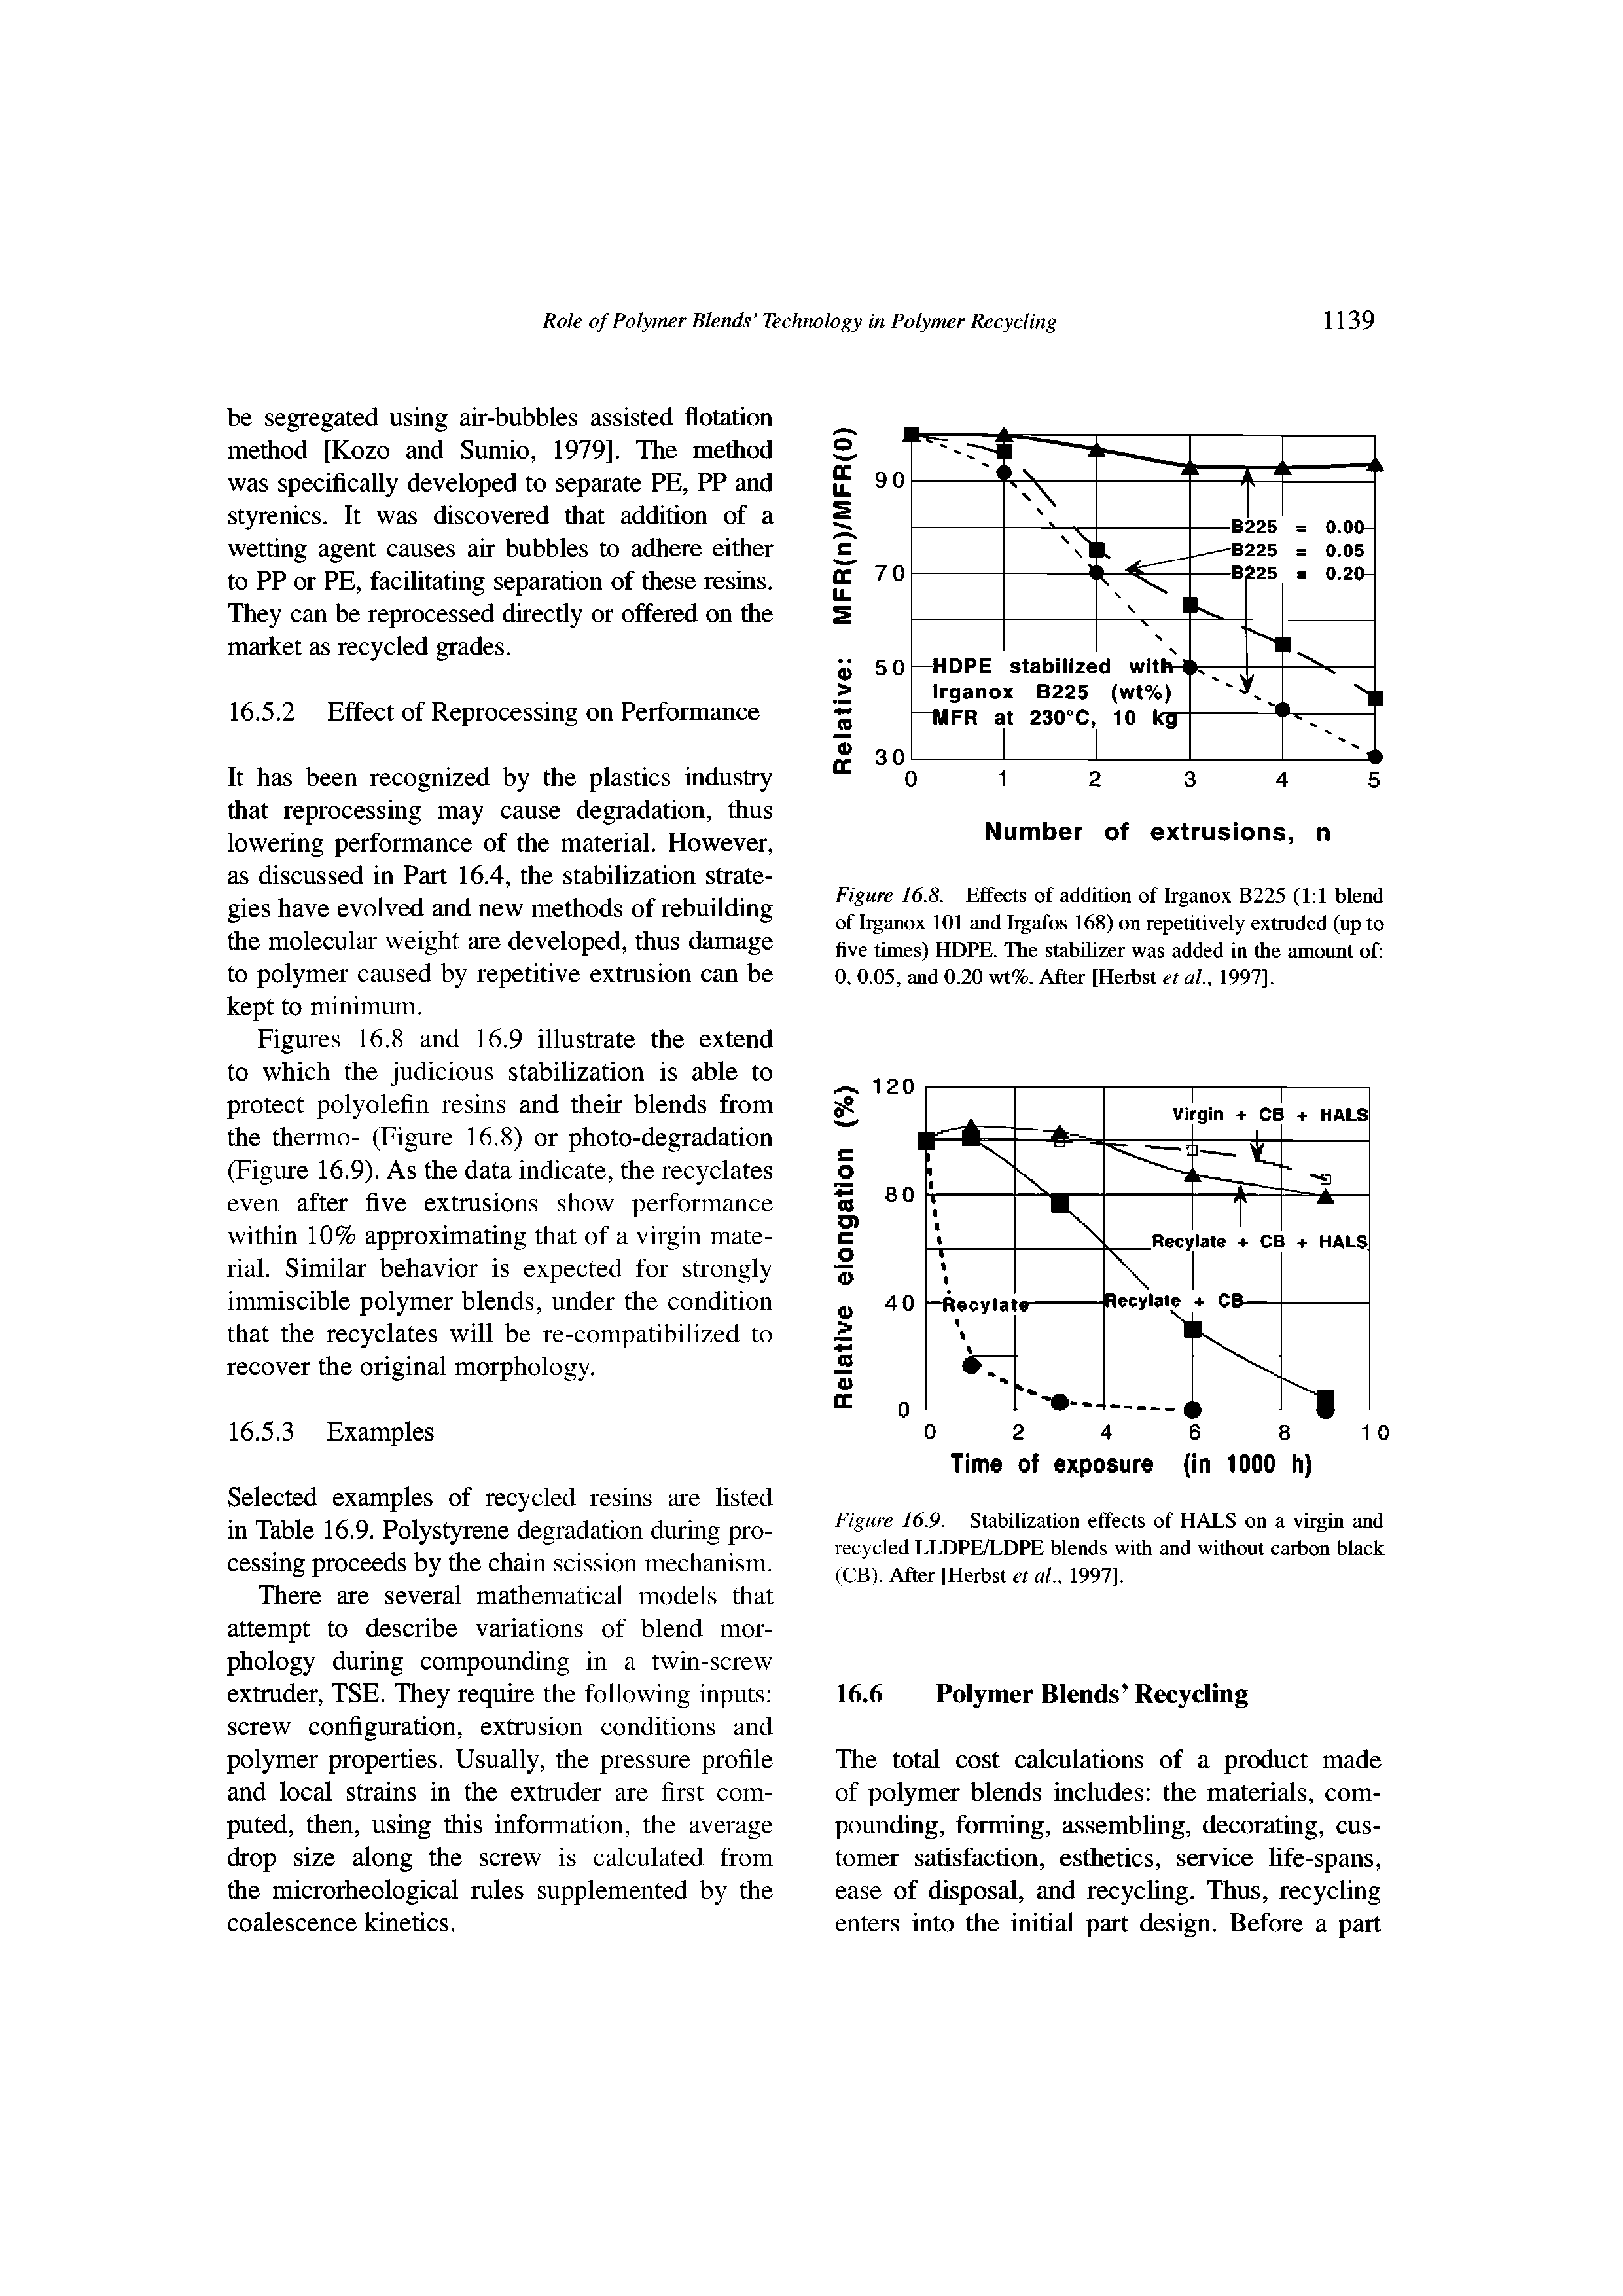 Figures 16.8 and 16.9 illustrate the extend to which the judicious stabilization is able to protect polyolefin resins and their blends from the thermo- (Figure 16.8) or photo-degradation (Figure 16.9). As the data indicate, the recyclates even after five extrusions show performance within 10% approximating that of a virgin material. Similar behavior is expected for strongly immiscible polymer blends, under the condition that the recyclates will be re-compatibilized to recover the original morphology.